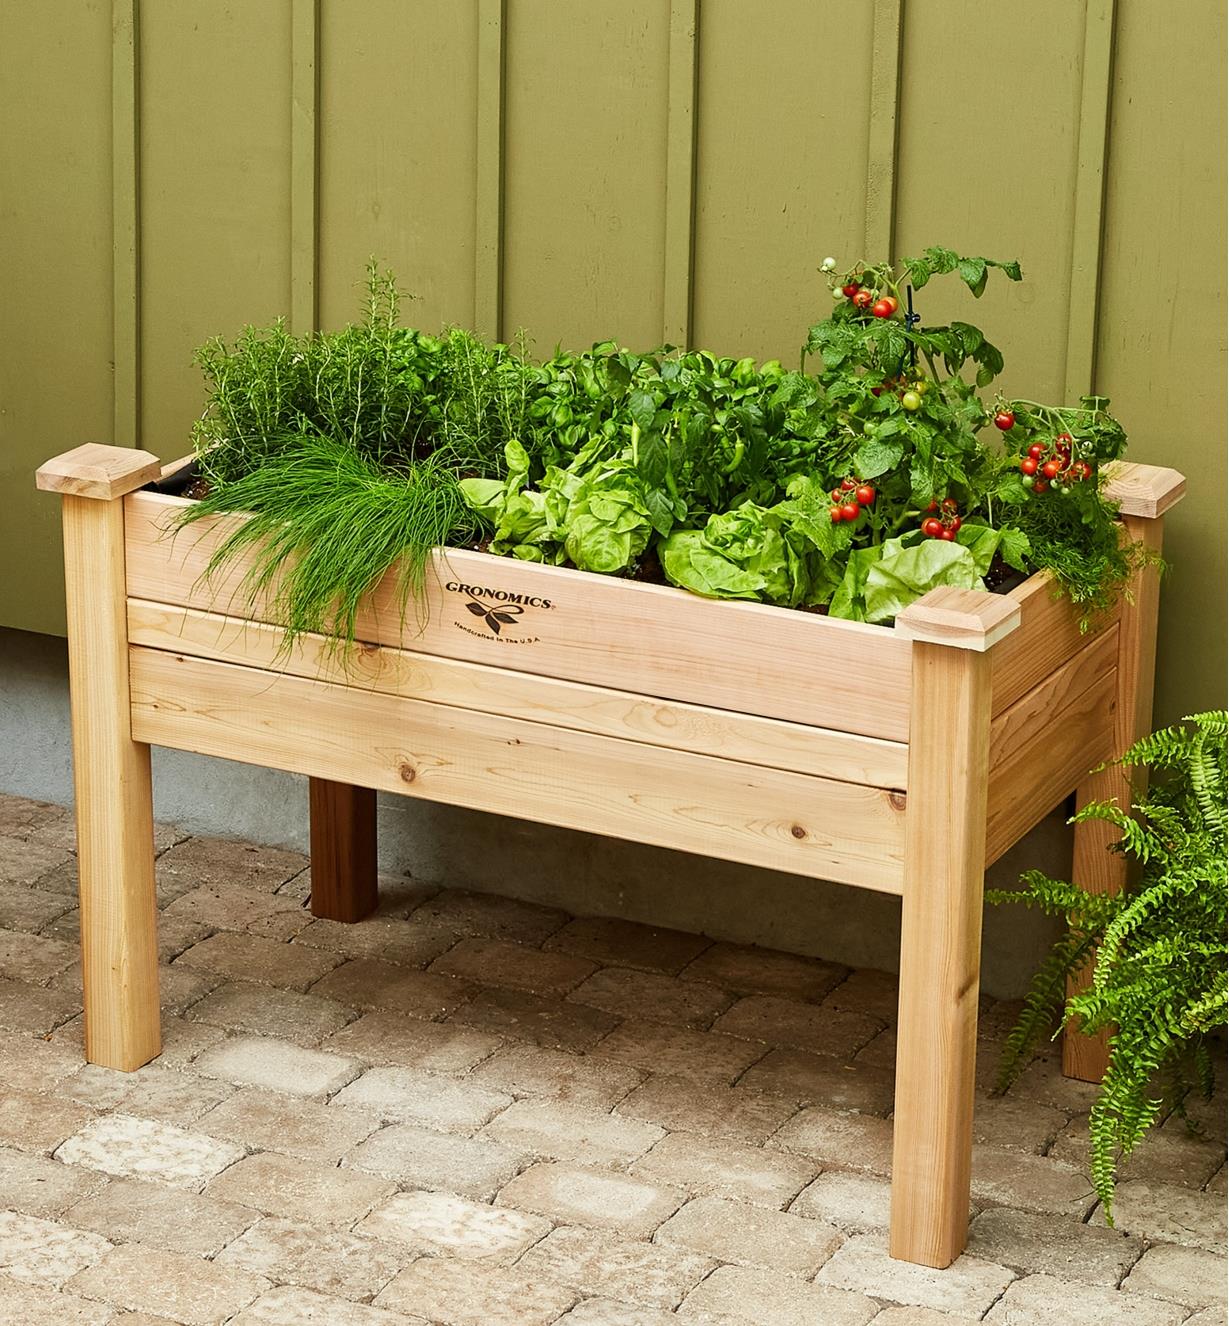 The elevated planter with a variety of vegetables growing in it